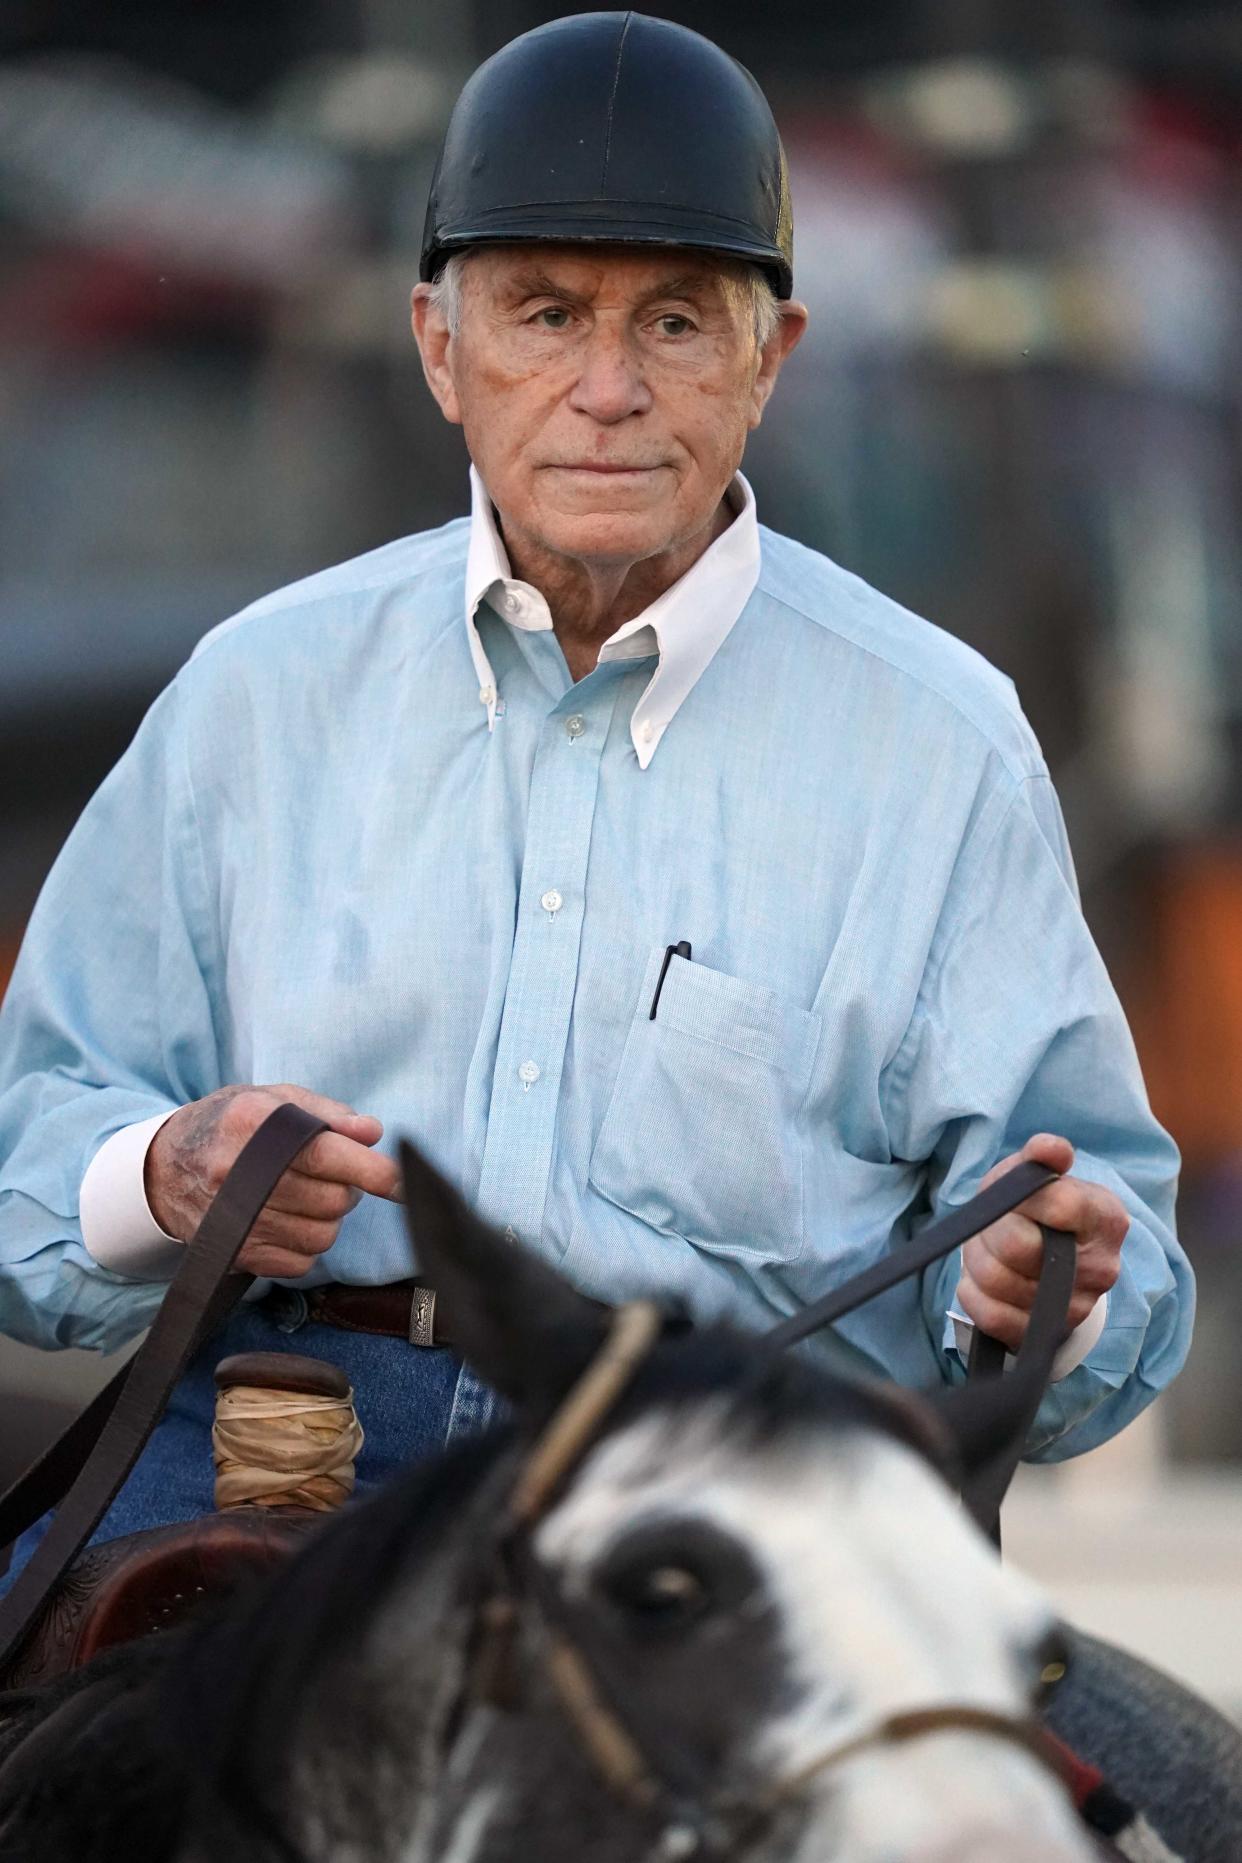 May 21, 2022; Baltimore, MD, USA; D. Wayne Lukas during morning workouts prior to the Preakness Stakes at Pimlico Race Course. Mandatory Credit: Mitch Stringer-USA TODAY Sports